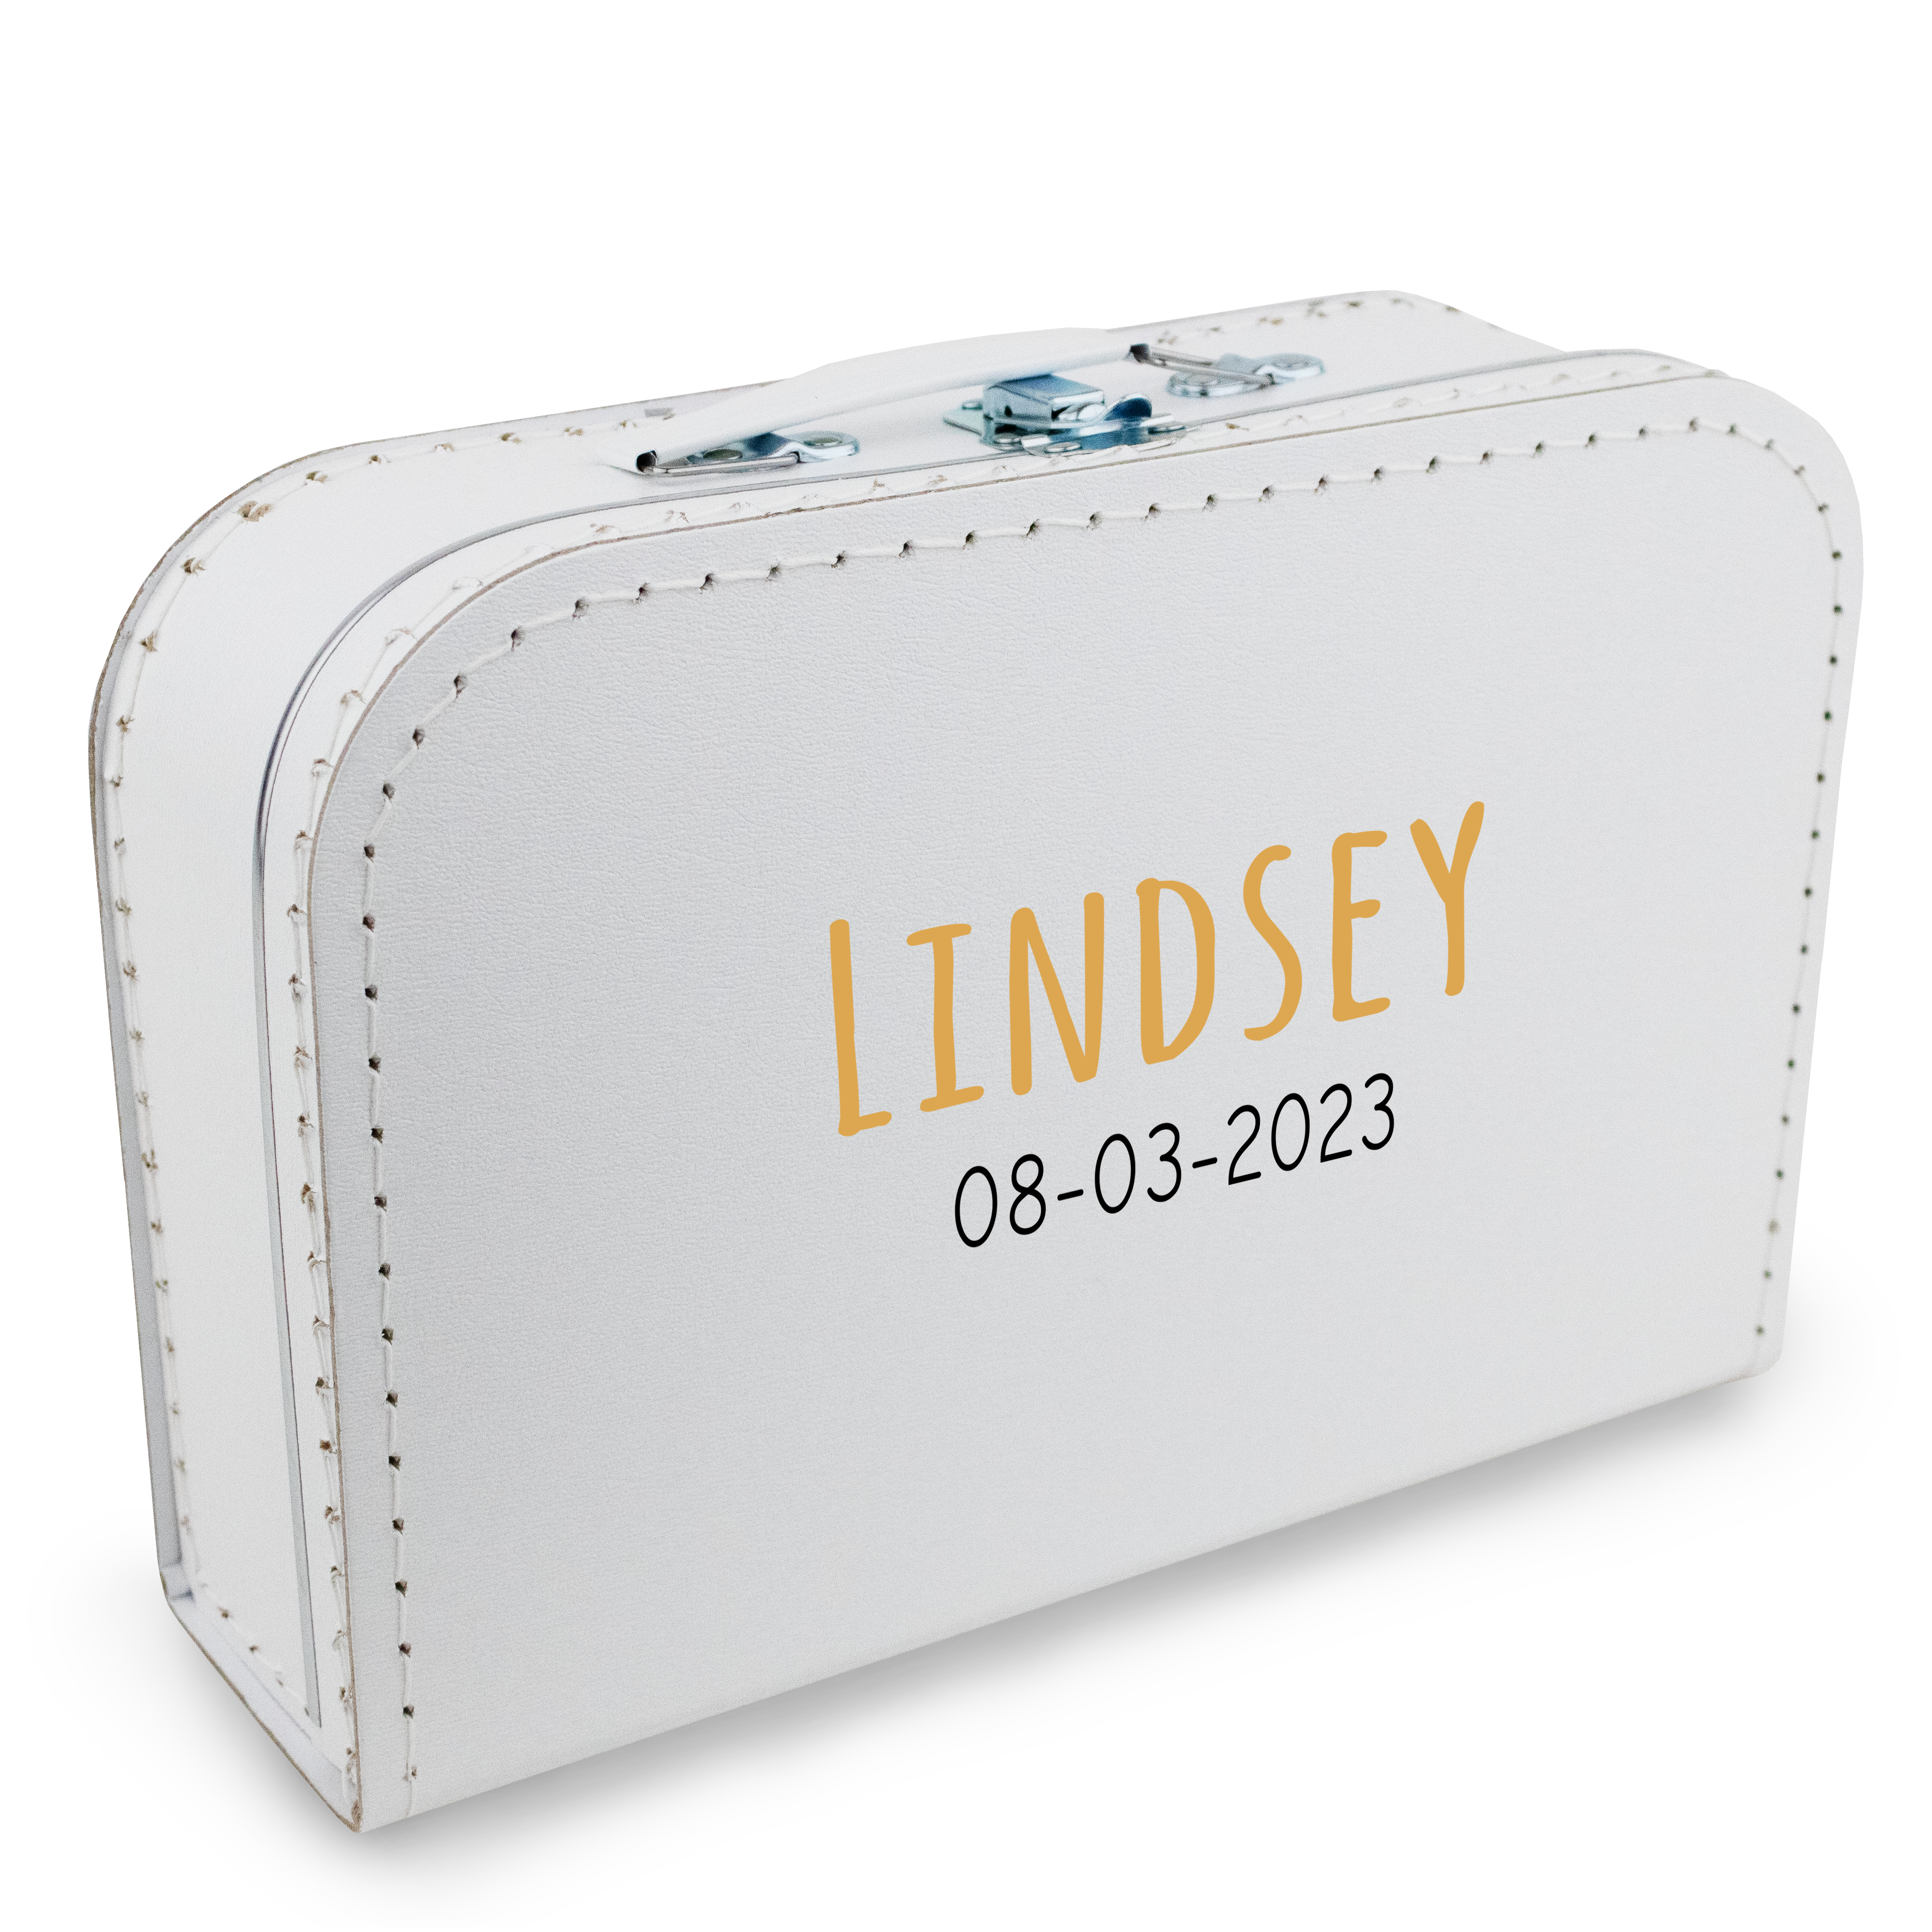 White Children's Suitcase with Name